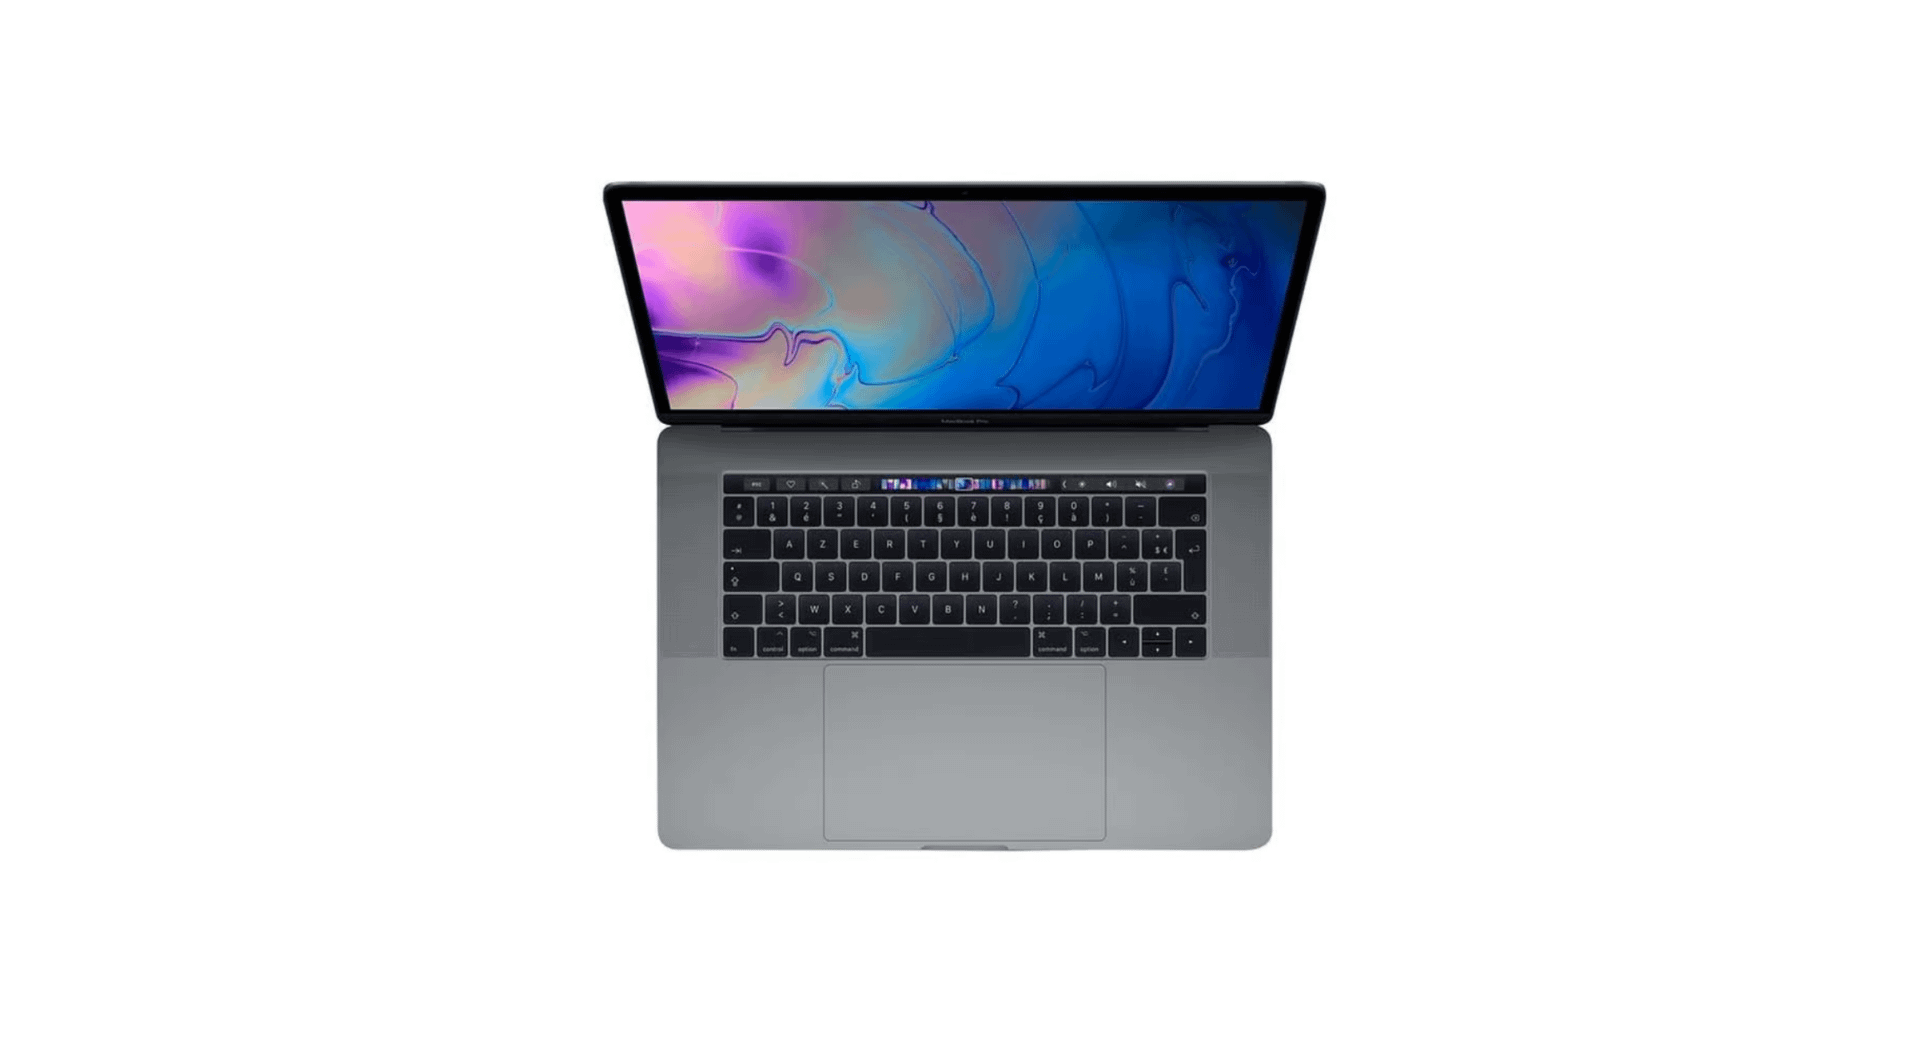 Apple MacBook Pro 15.4 inch 2019 Core i7 Technical Specifications